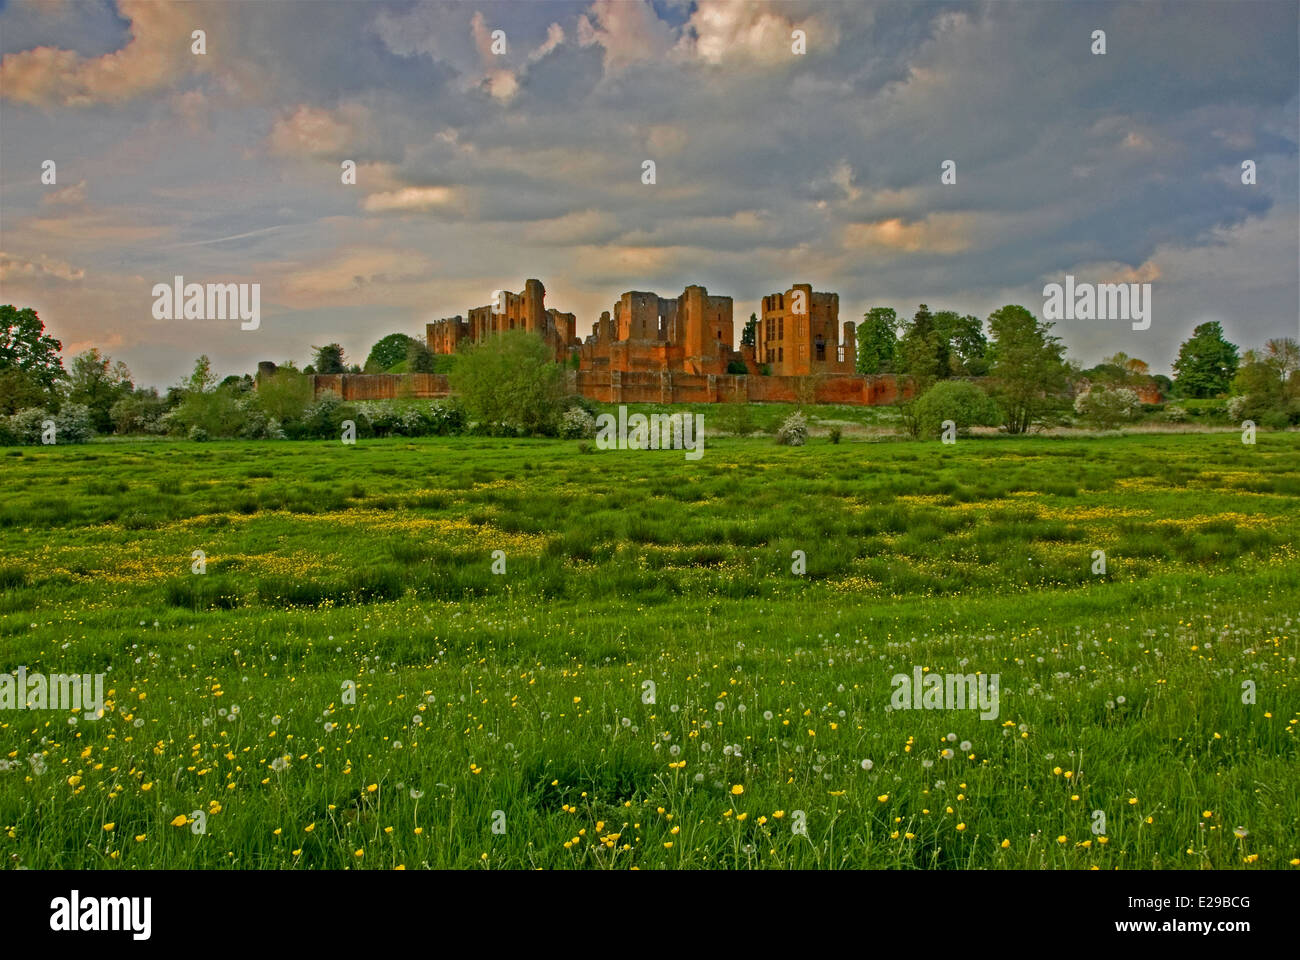 The ruins of Kenilworth Castle in Warwickshire can be seen from across farmland that once formed part of the moat. Stock Photo